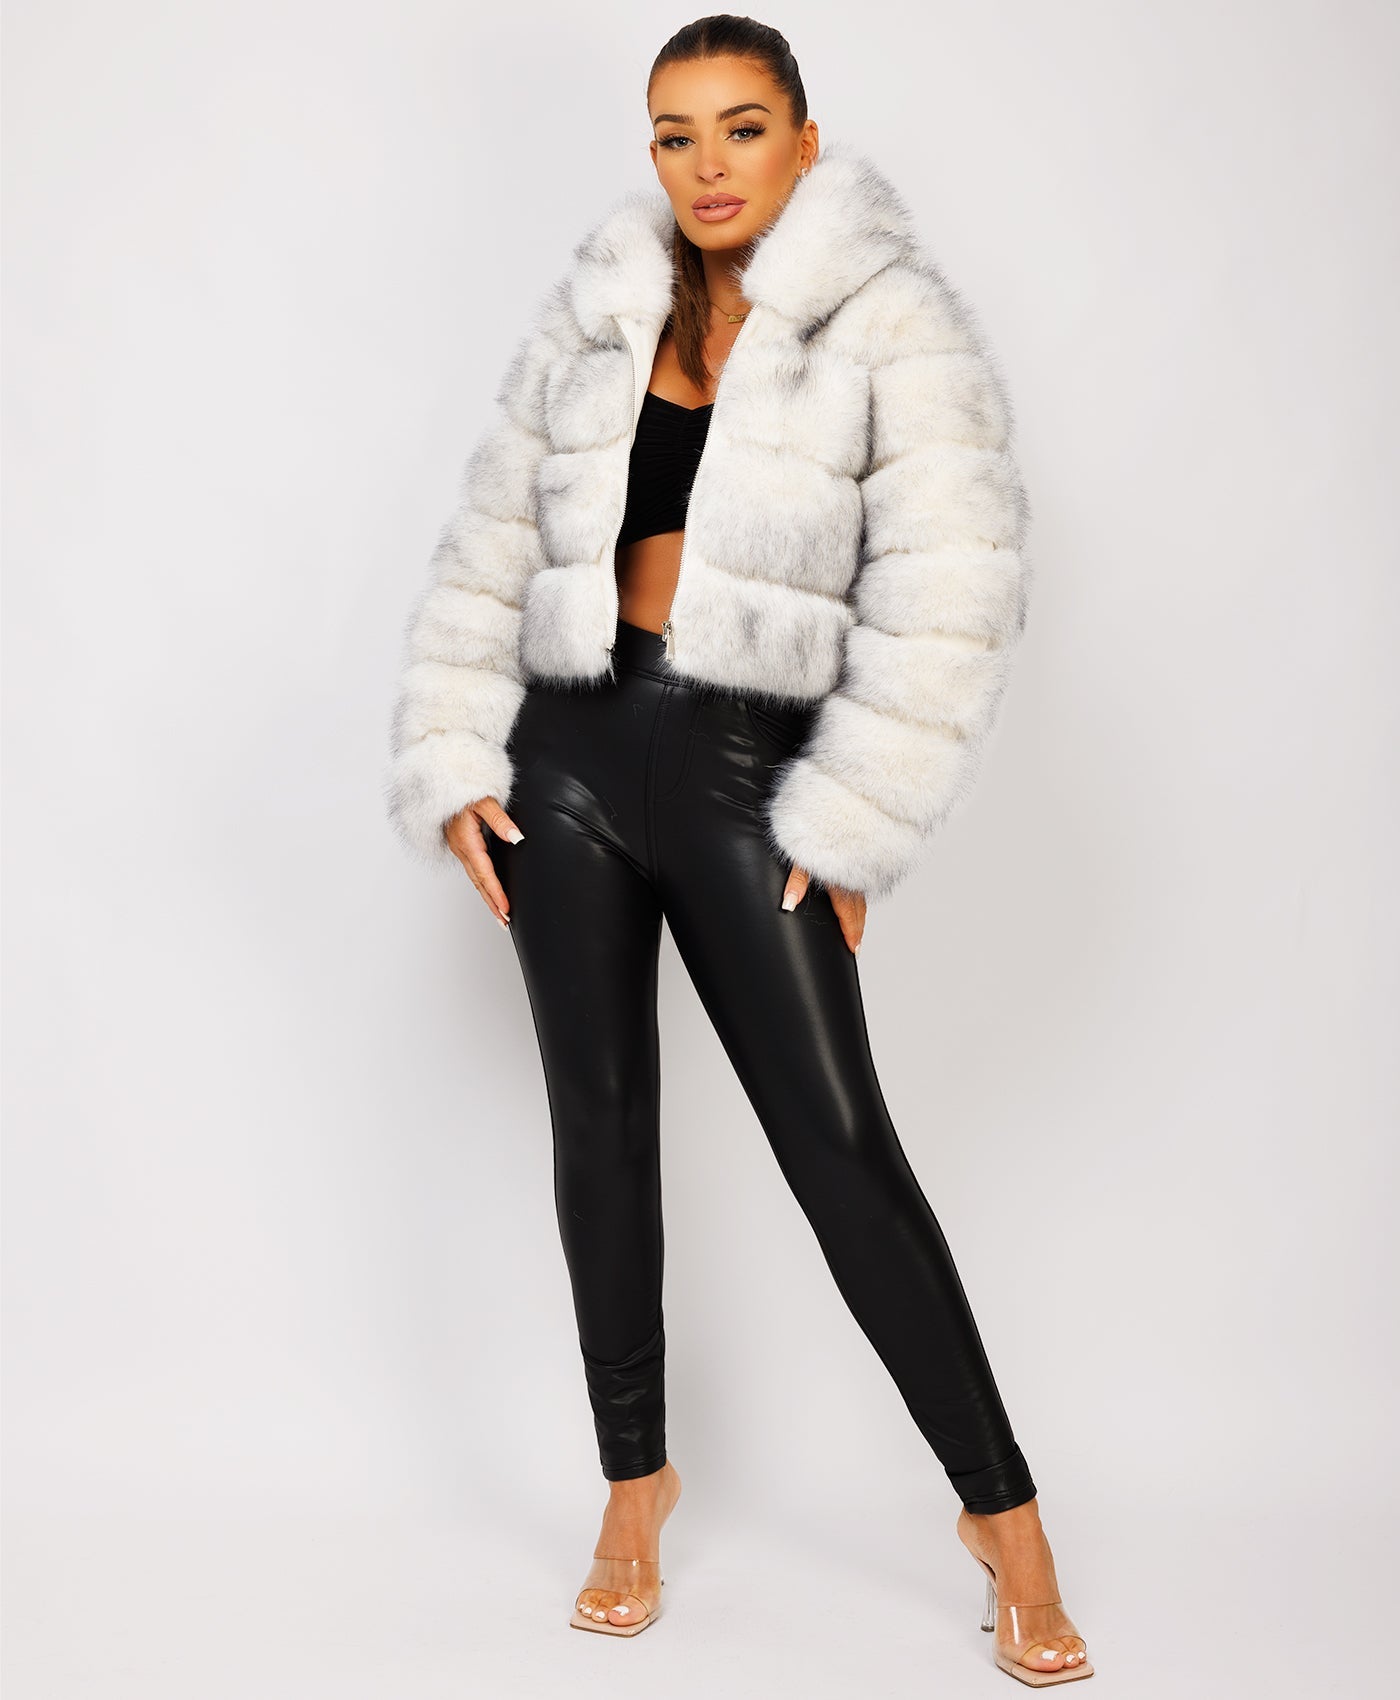 Snow-White-Premium-Hooded-Faux-Fur-Tiered-Jacket-Coat-5